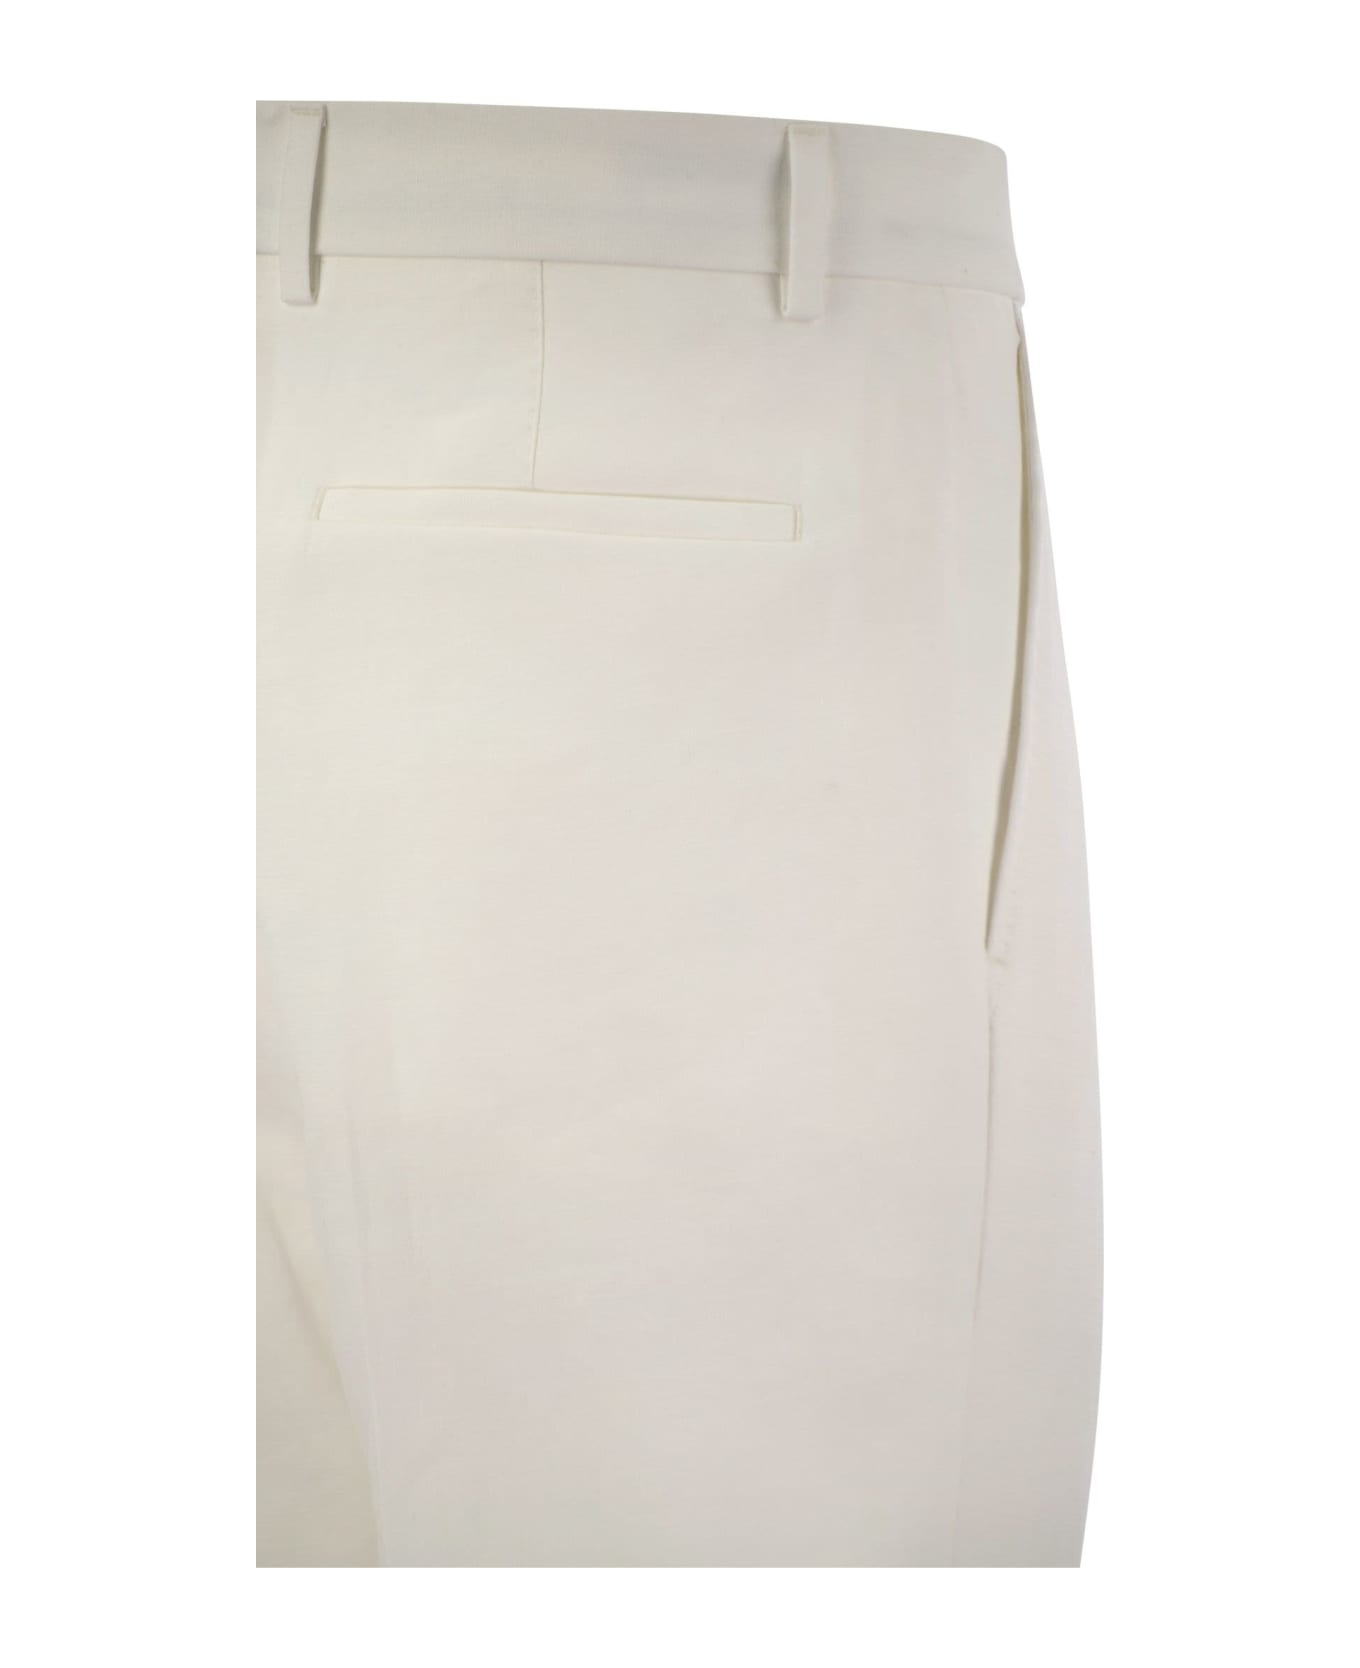 Brunello Cucinelli Leisure Fit Linen Trousers With Darts - Cream ボトムス